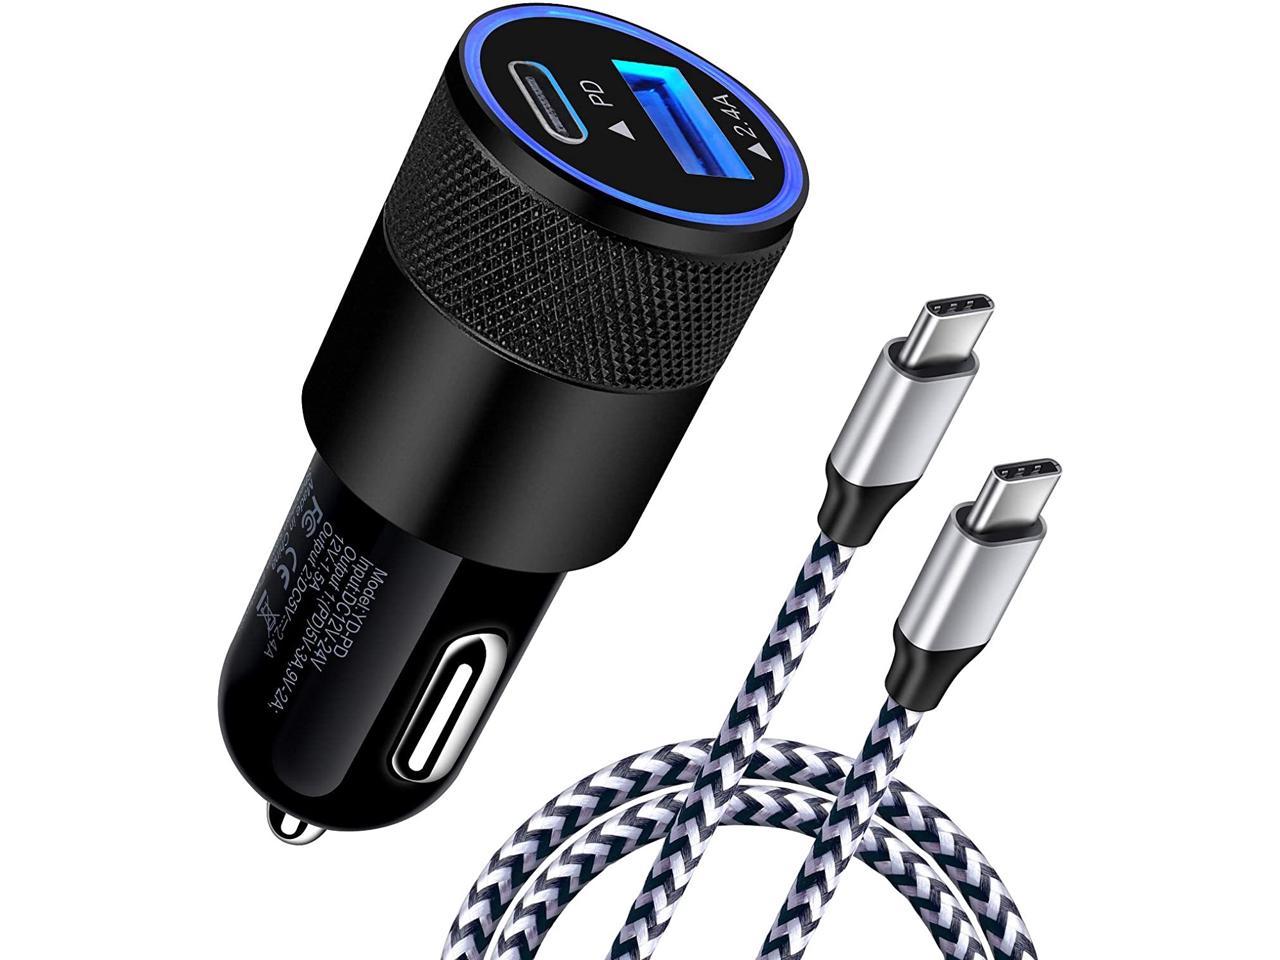 Usb C Car Charger Adapter 30w Usb C Cigarette Lighter Adapter For Samsung Galaxy S21 Ultra 5g S Fe Note Ultra S Ultra 2 A52 2 Google Pixel 5 4xl 4 Dual Port Car Charger Fast Charging Cable Newegg Com